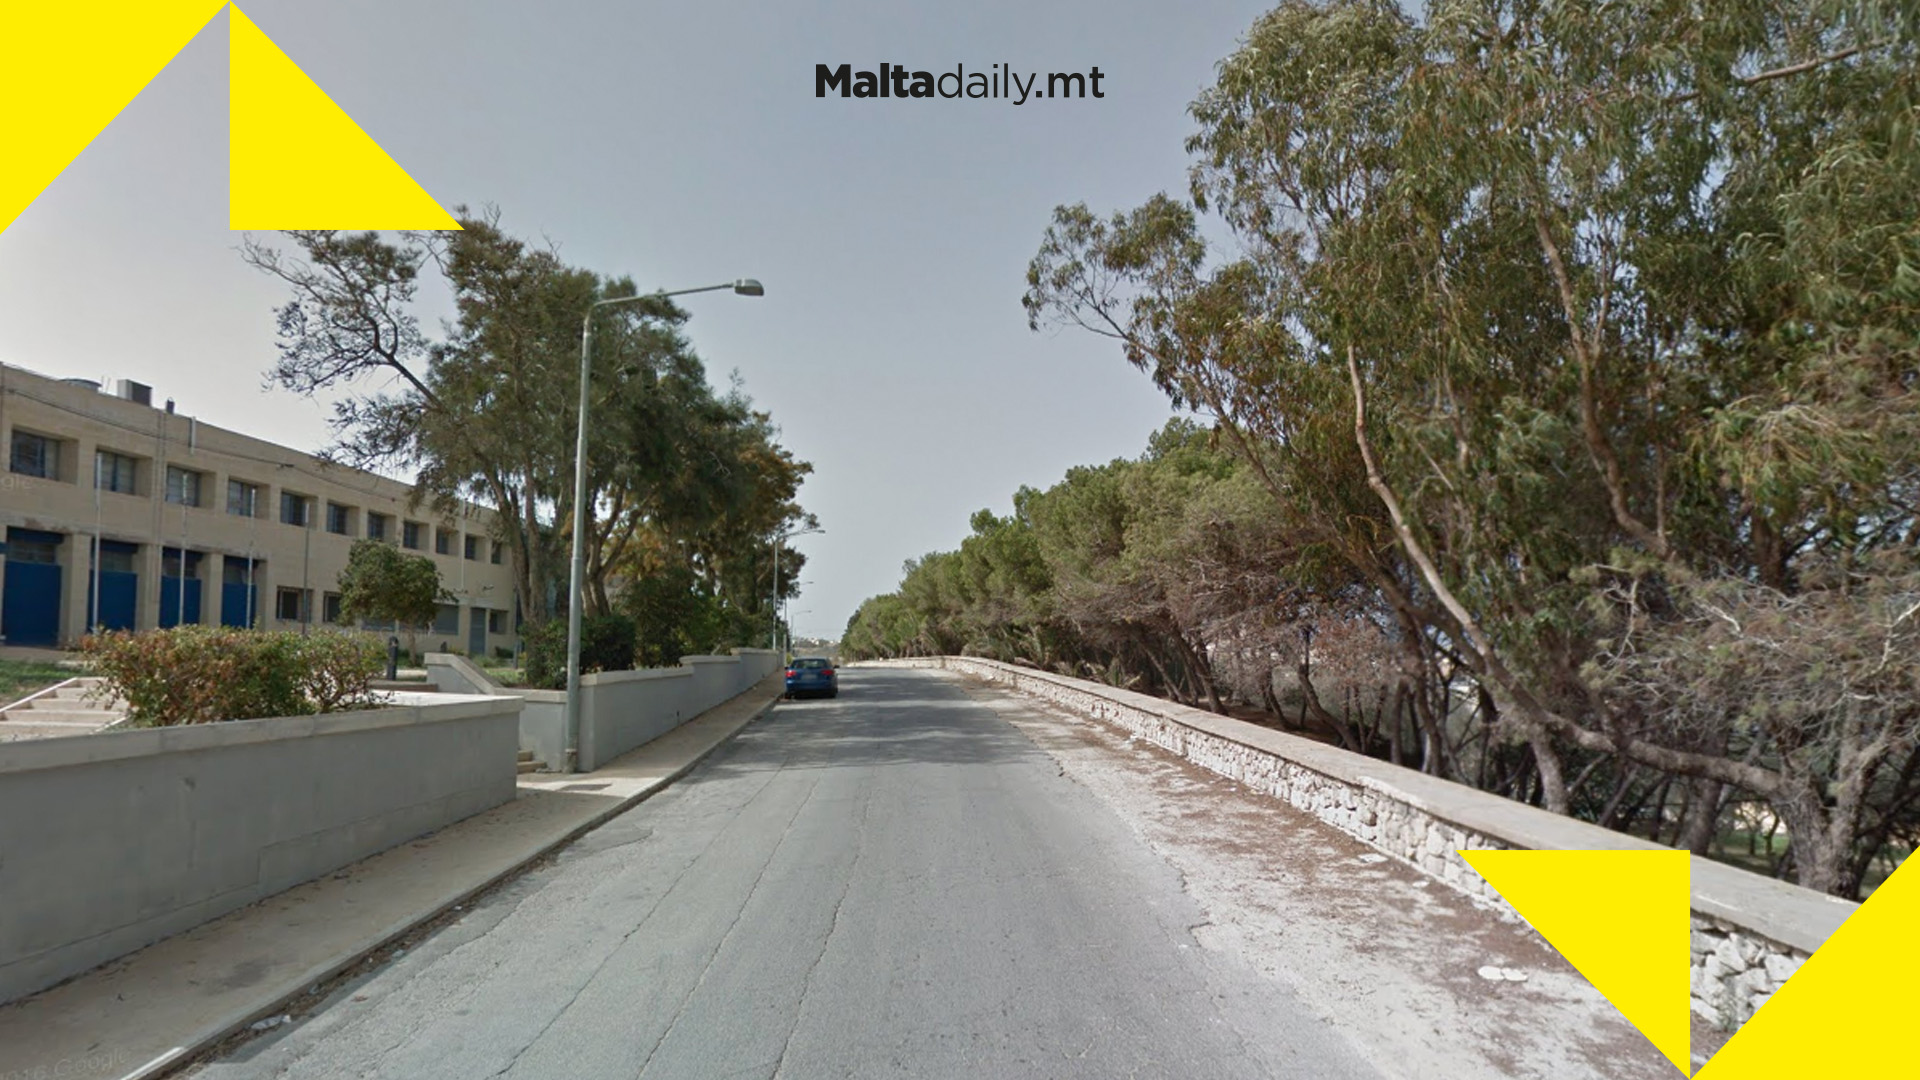 Motorcyclist sustains serious injuries after traffic incident in Xewkija